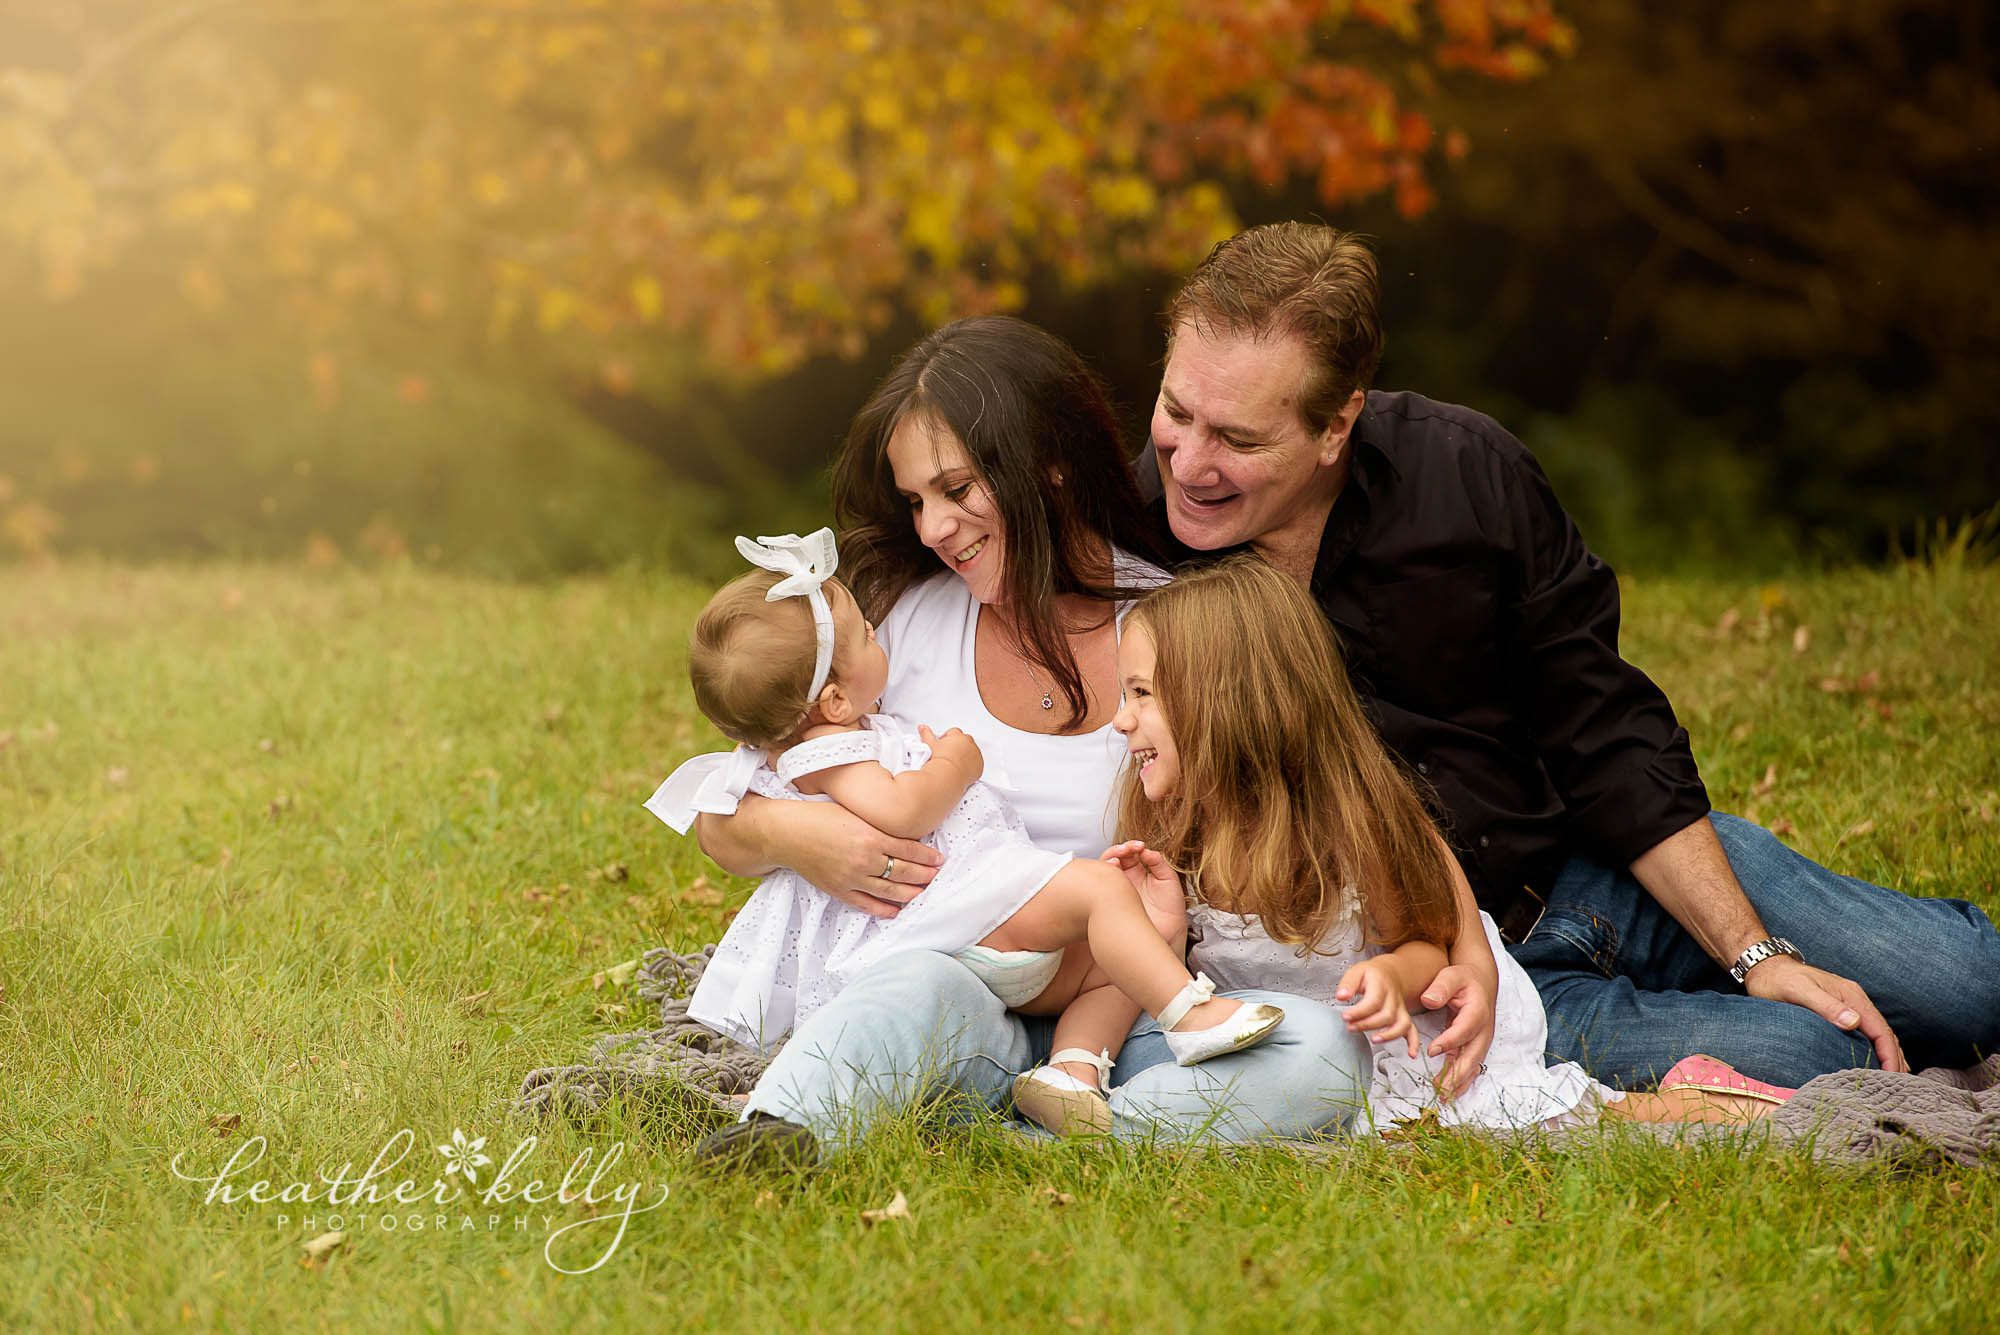 newtown family photography sessions. ct mini sessions.